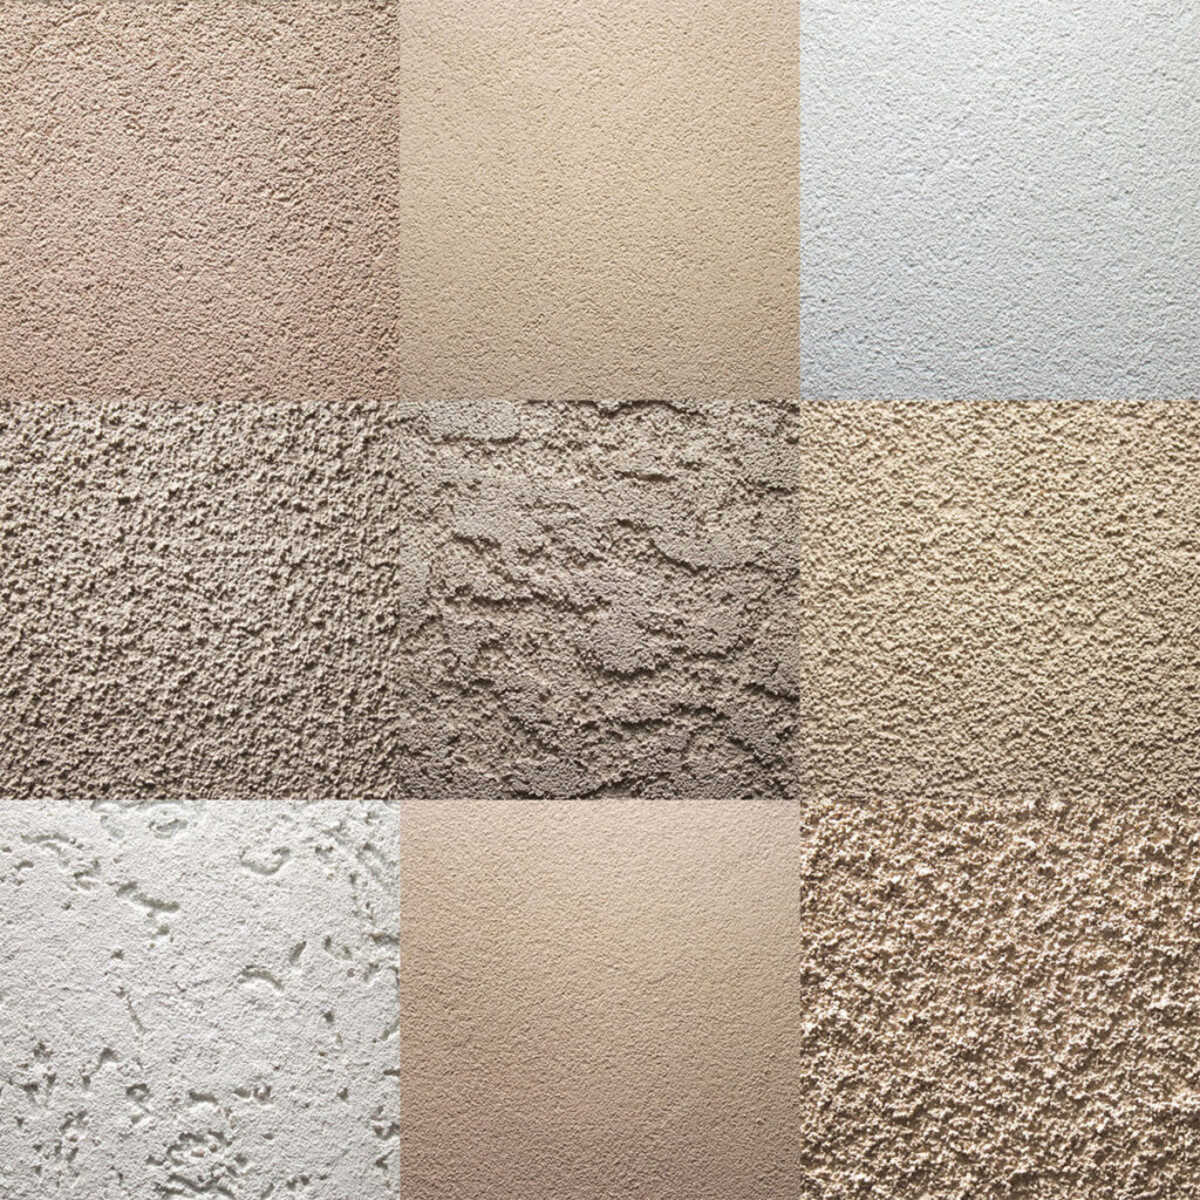 What Are The Different Types Of Stucco Finishes | Storables